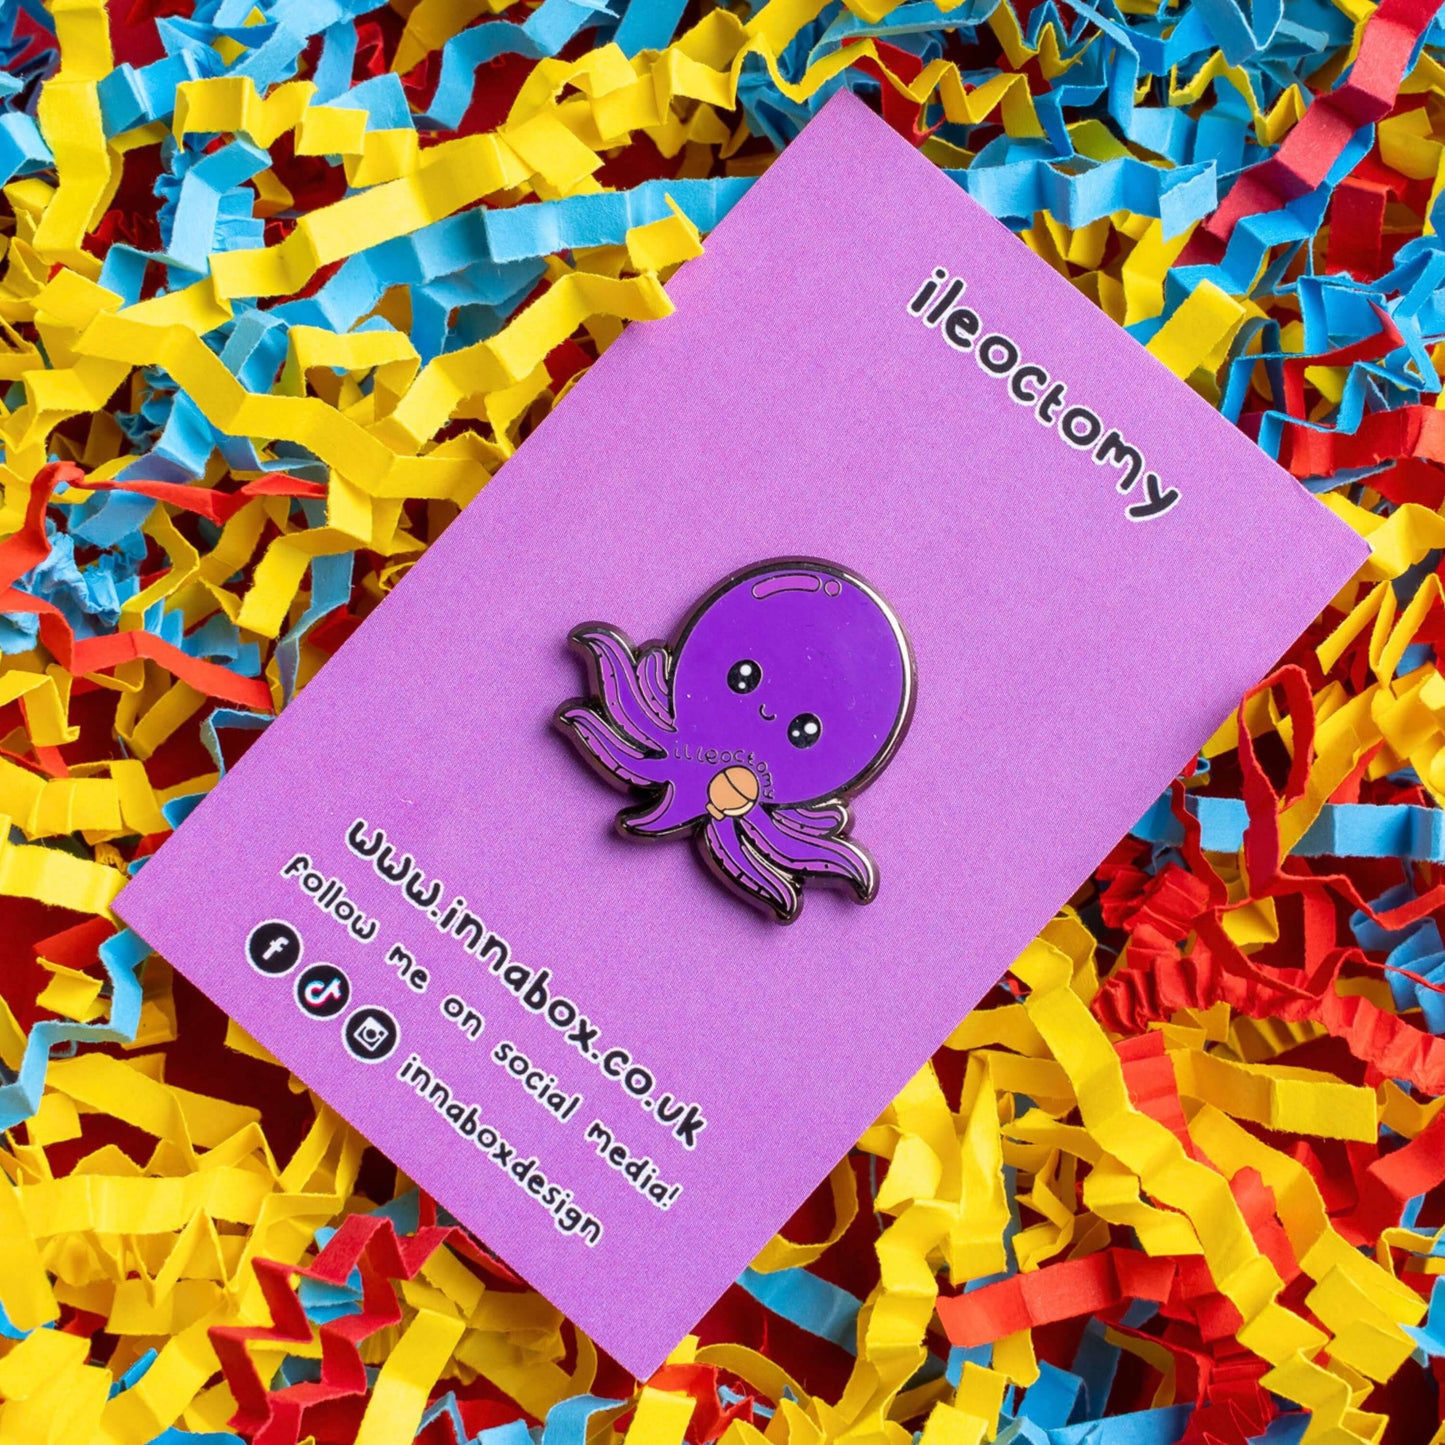 Ileoctomy Enamel Pin - Ileostomy on purple backing card laid on a yellow, blue and red card confetti background. The enamel pin is a cute smiling purple octopus sticker with text saying ileoctomy on its belly with a stoma bag underneath. Enamel pin designed to raise awareness for Ileostomy.